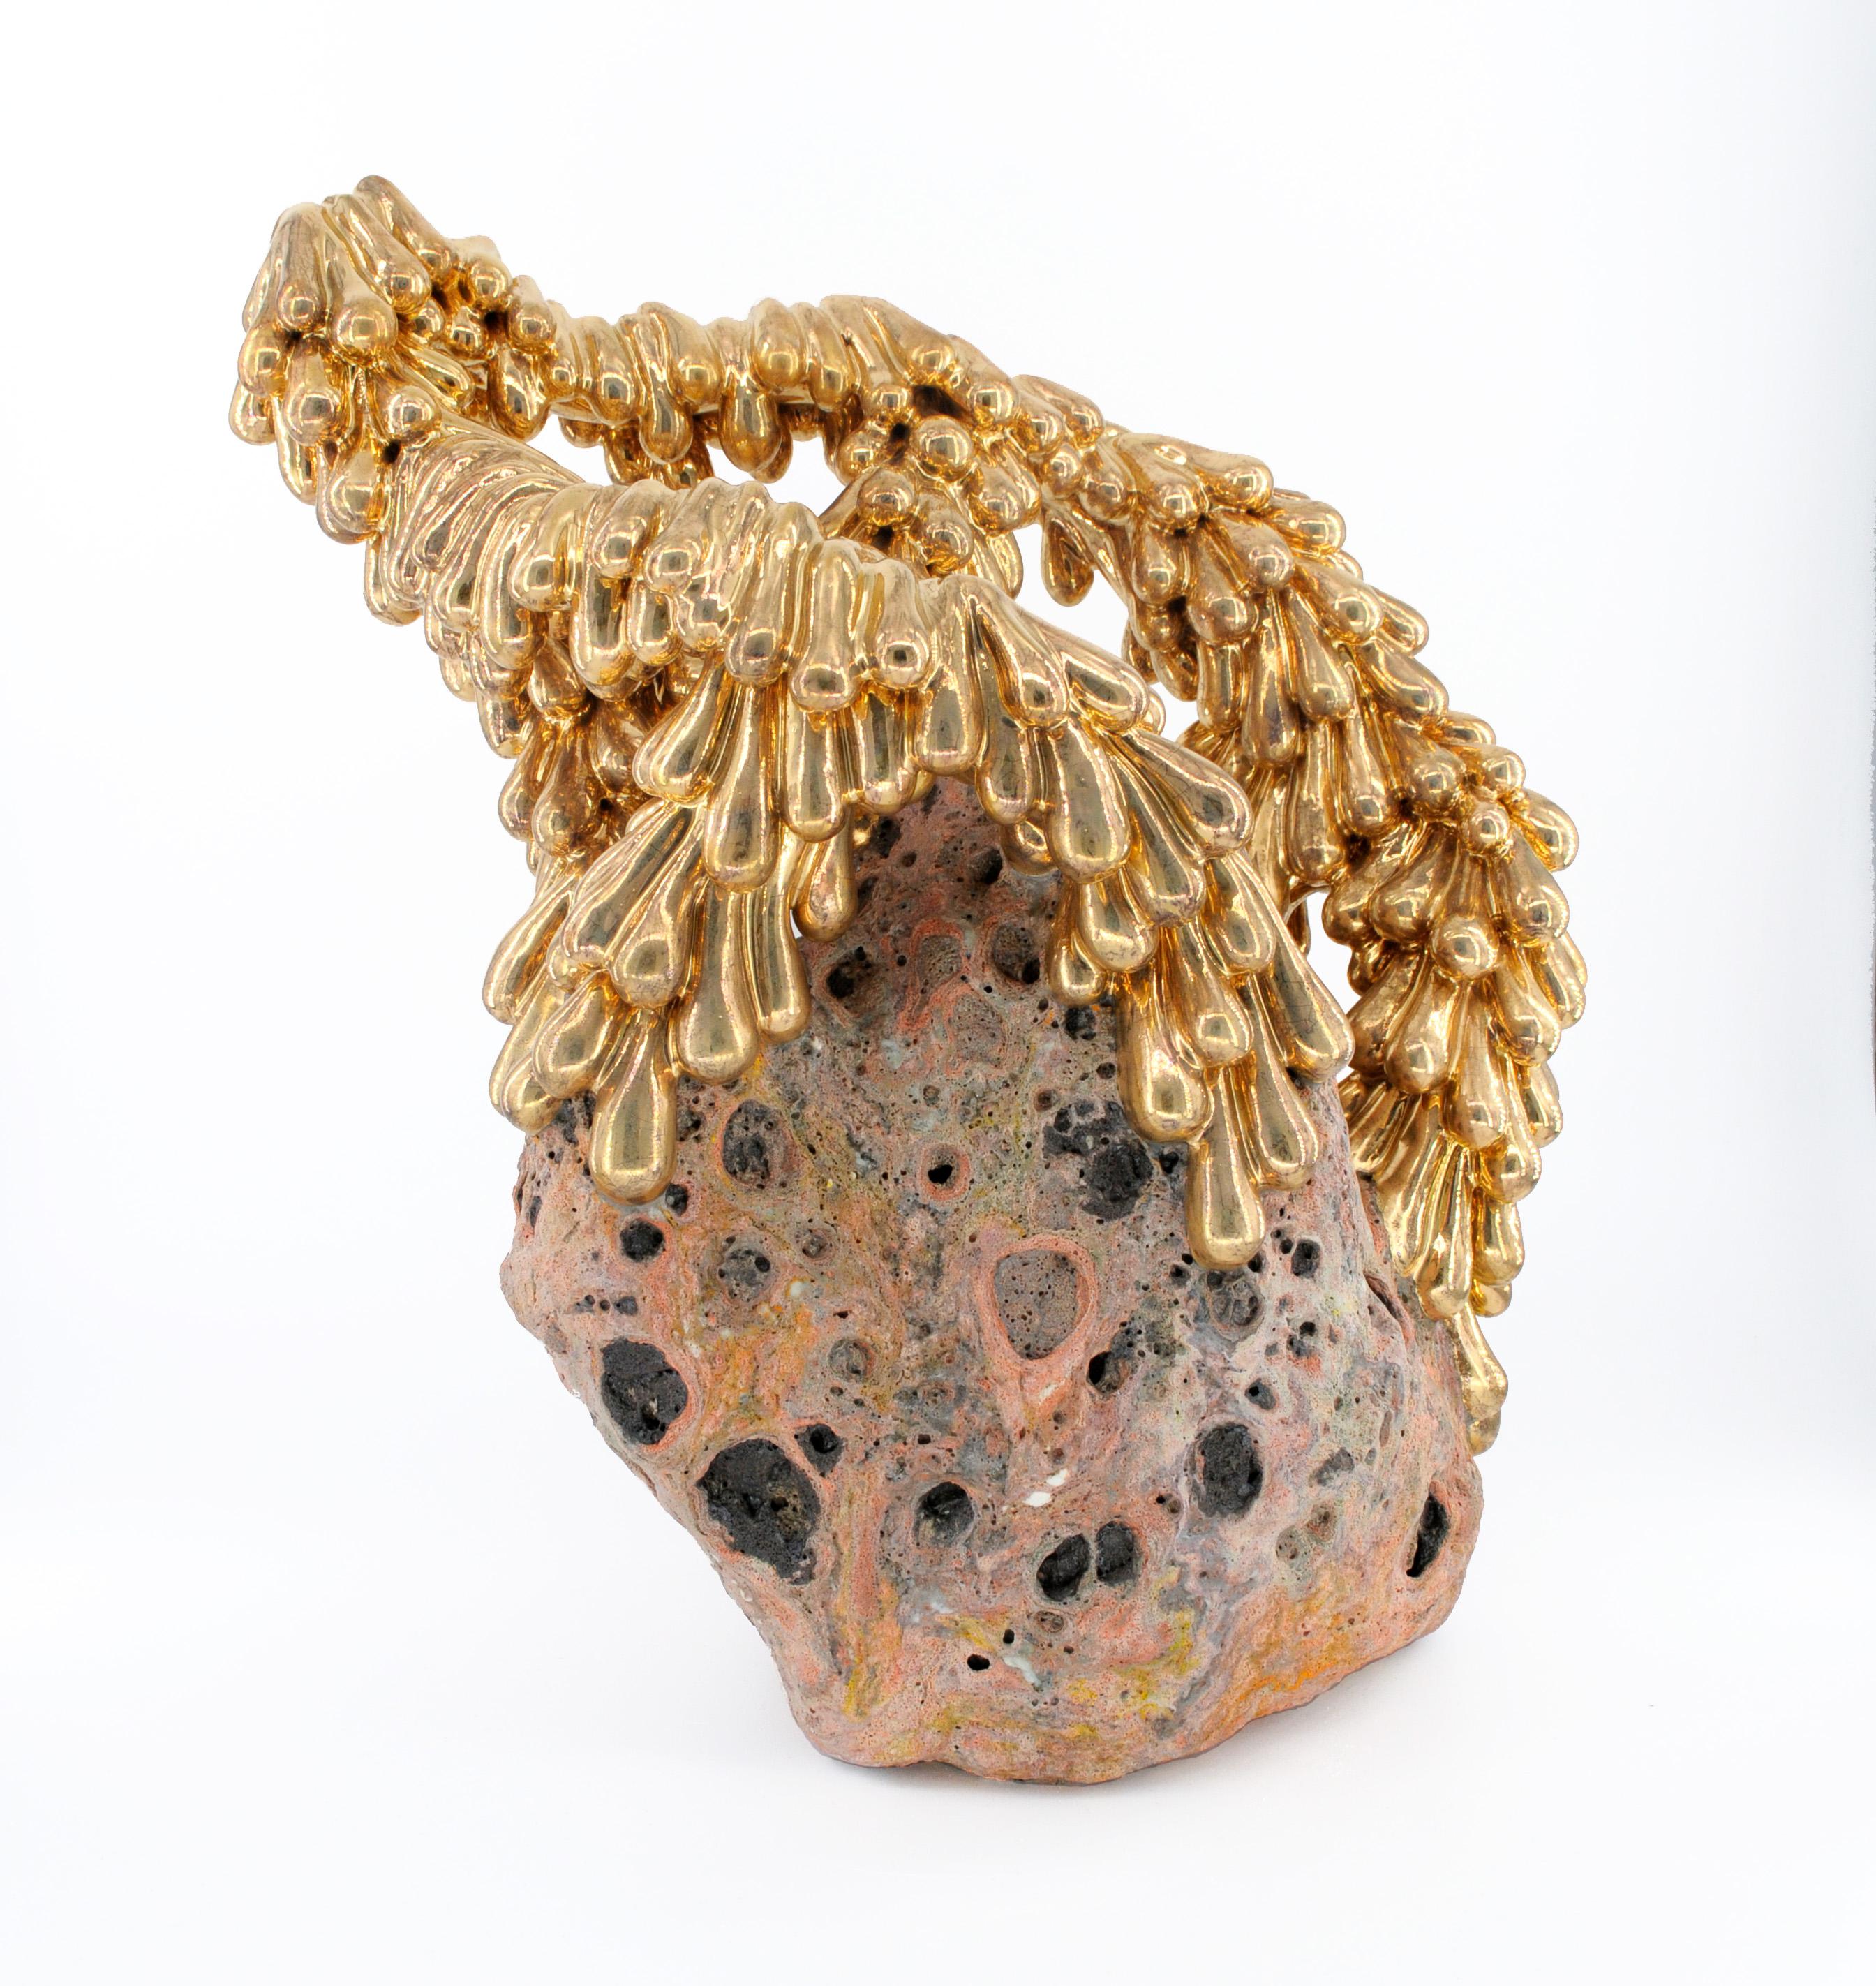 Sasha Koozel Reibstein Abstract Sculpture - "Forged in Flame", Contemporary, Abstract, Ceramic, Sculpture, 24k Gold Luster